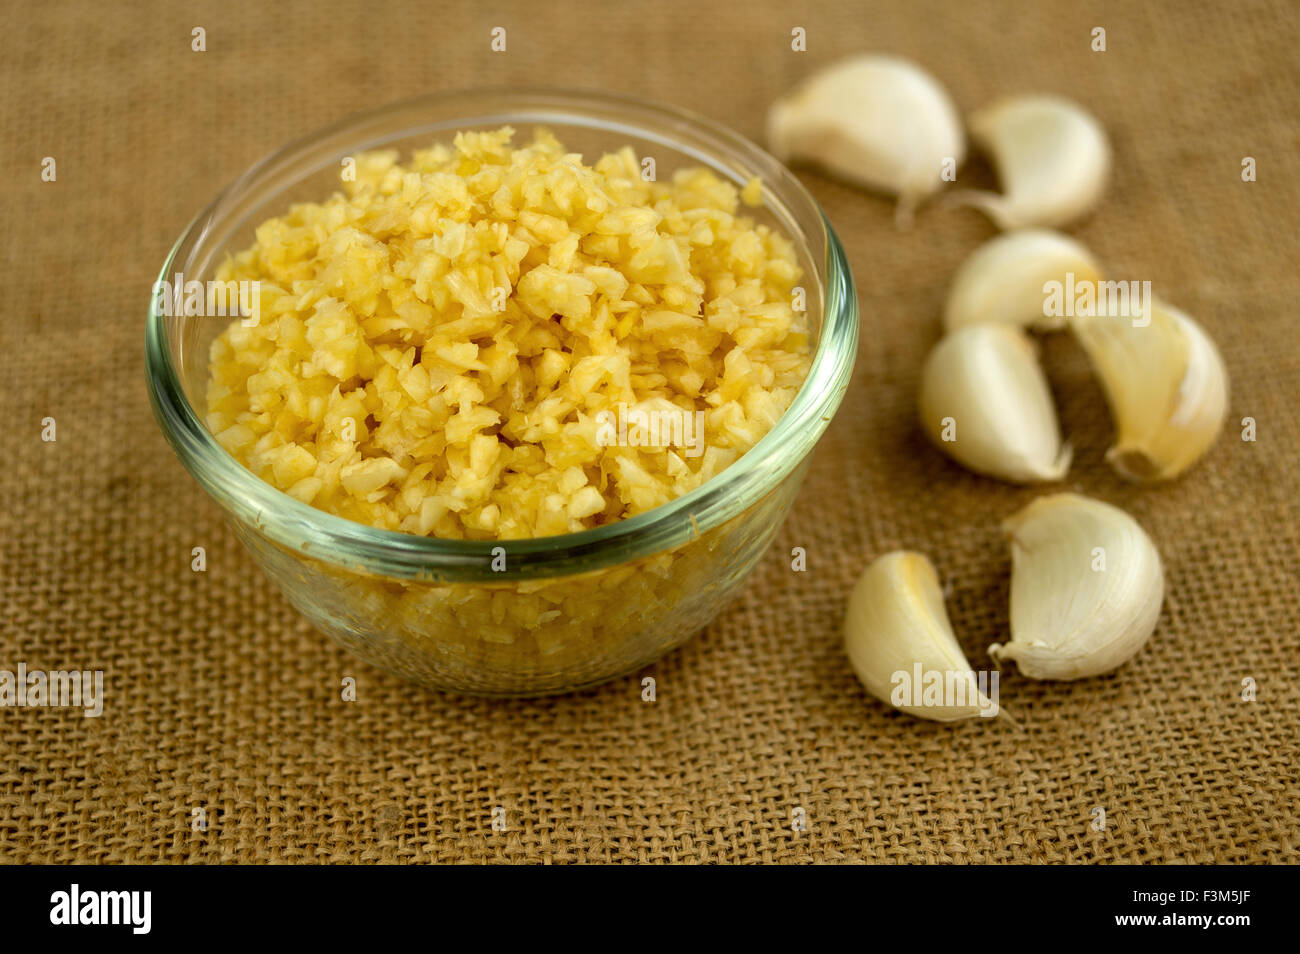 Closeup of finely chopped garlic in a glass bowl with garlic cloves in the background against a sack cloth texture. Stock Photo